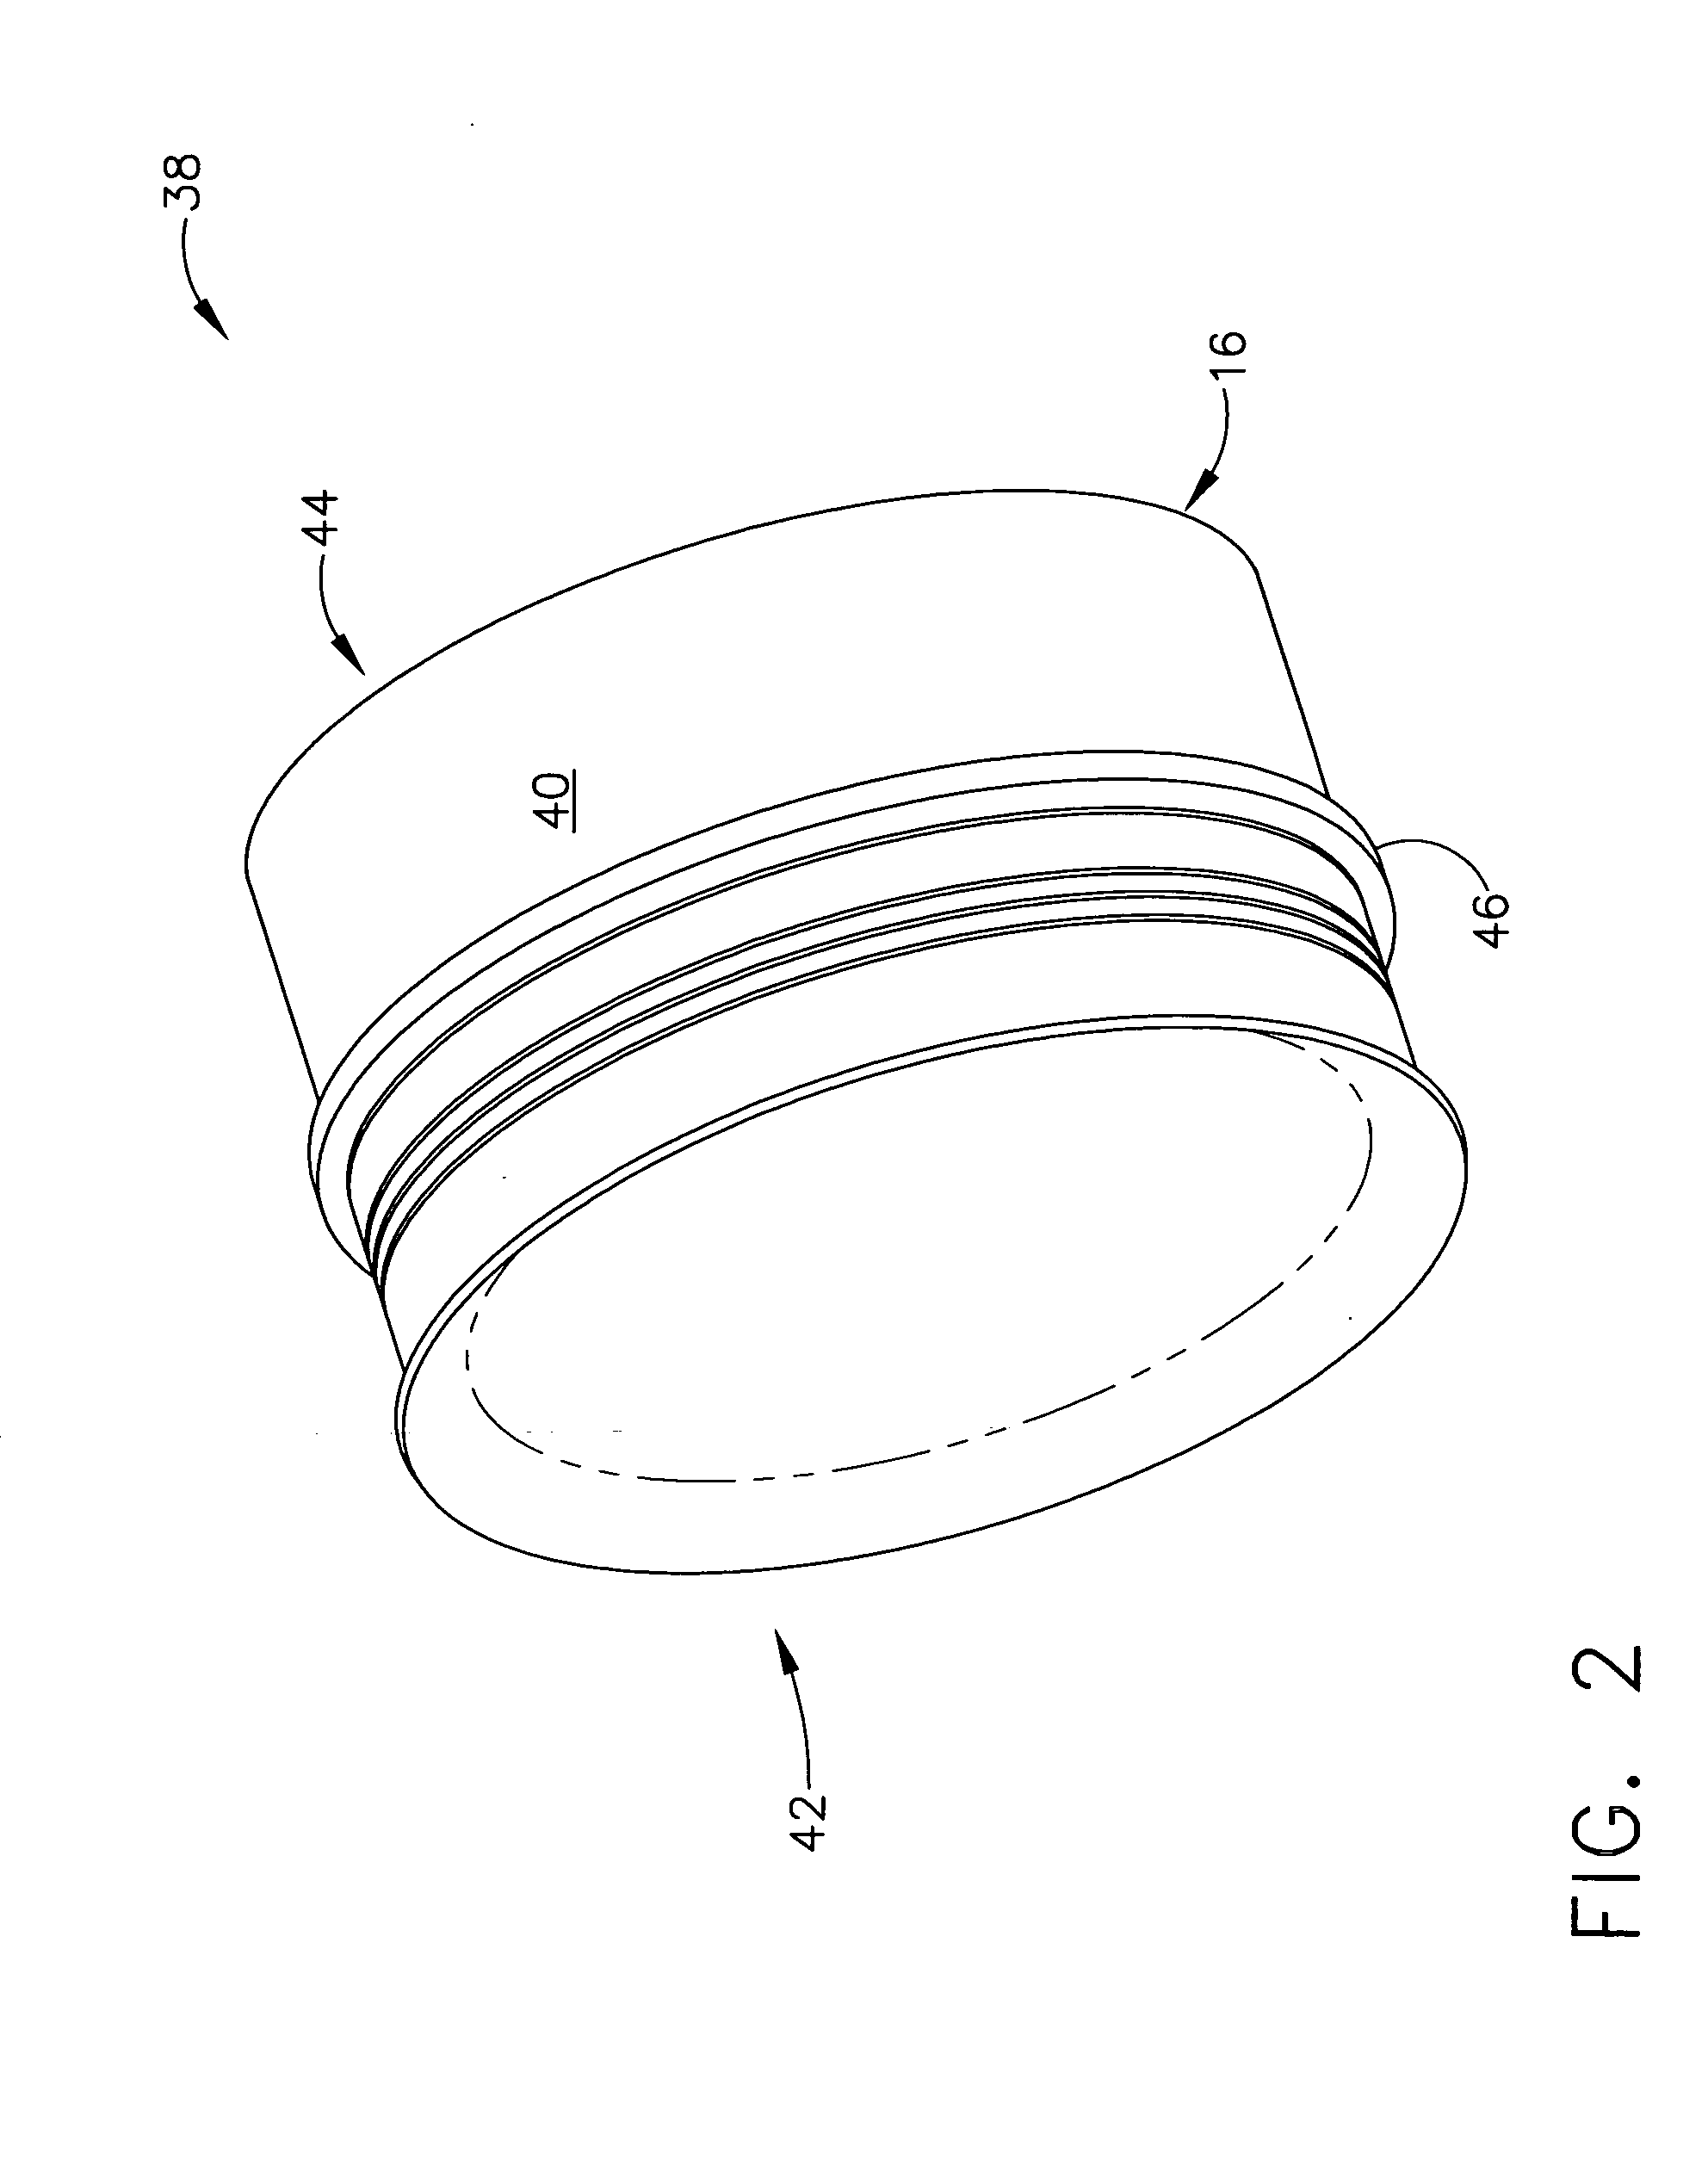 Methods for reducing stress on composite structures